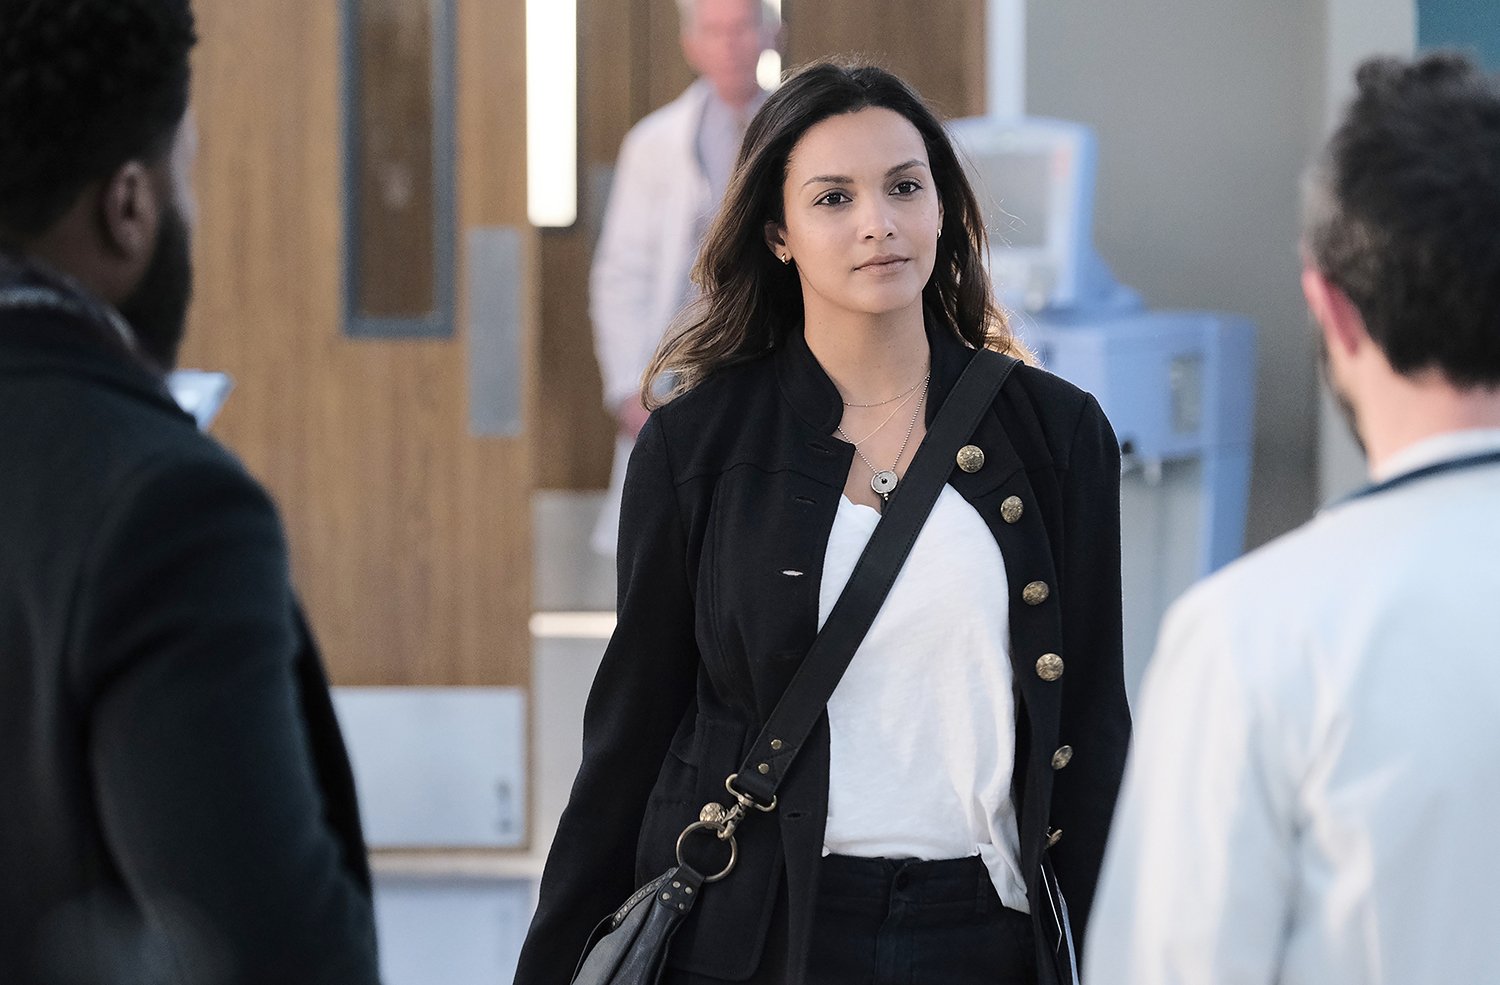 Jessica Lucas as Billie Sutton on The Resident